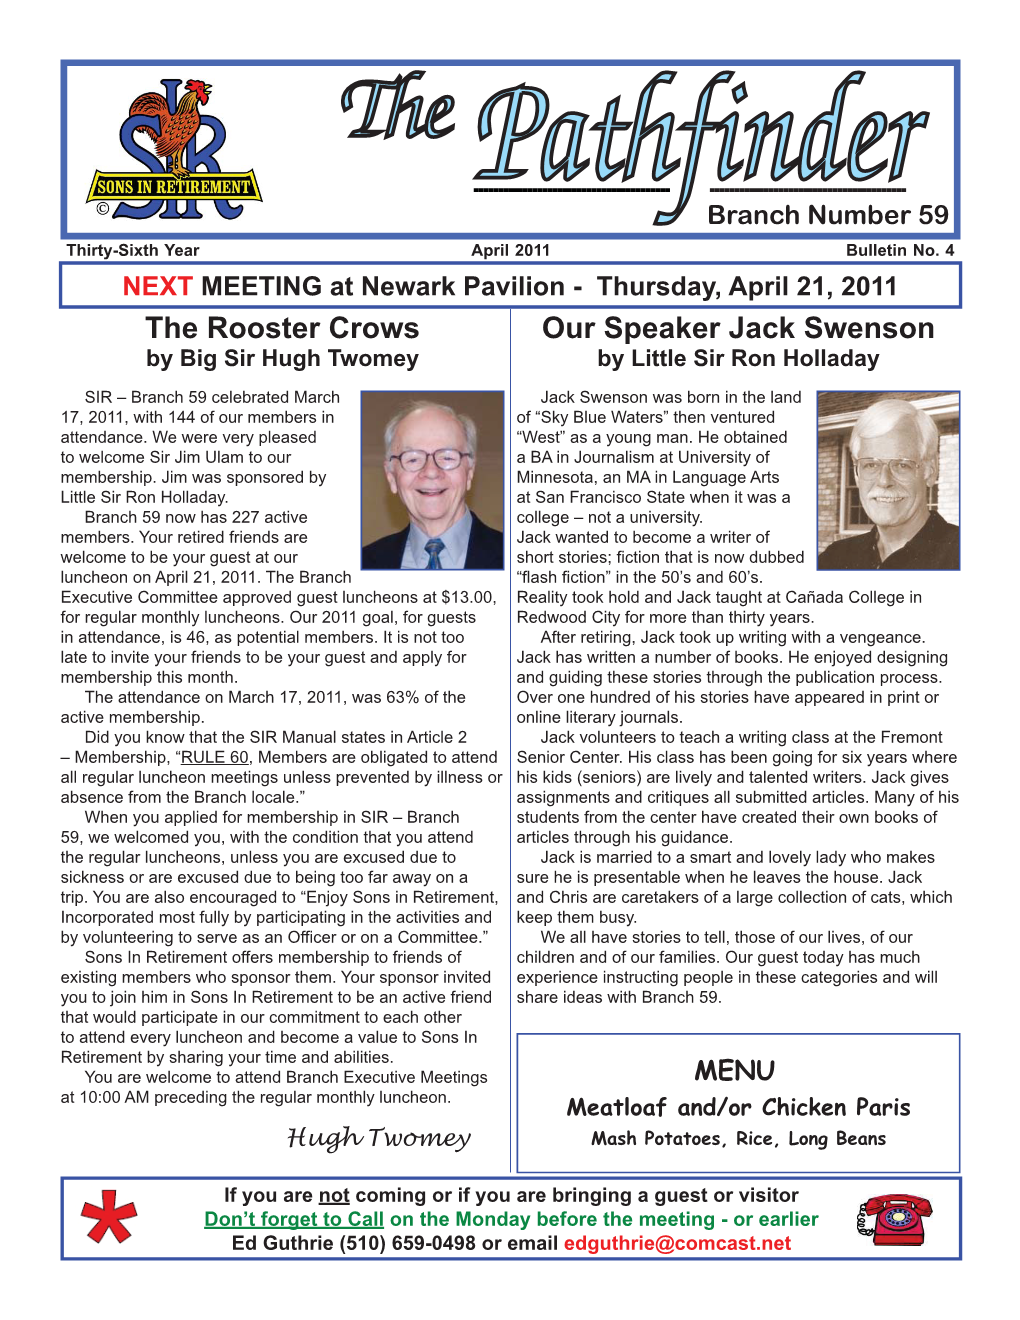 The Rooster Crows Our Speaker Jack Swenson by Big Sir Hugh Twomey by Little Sir Ron Holladay